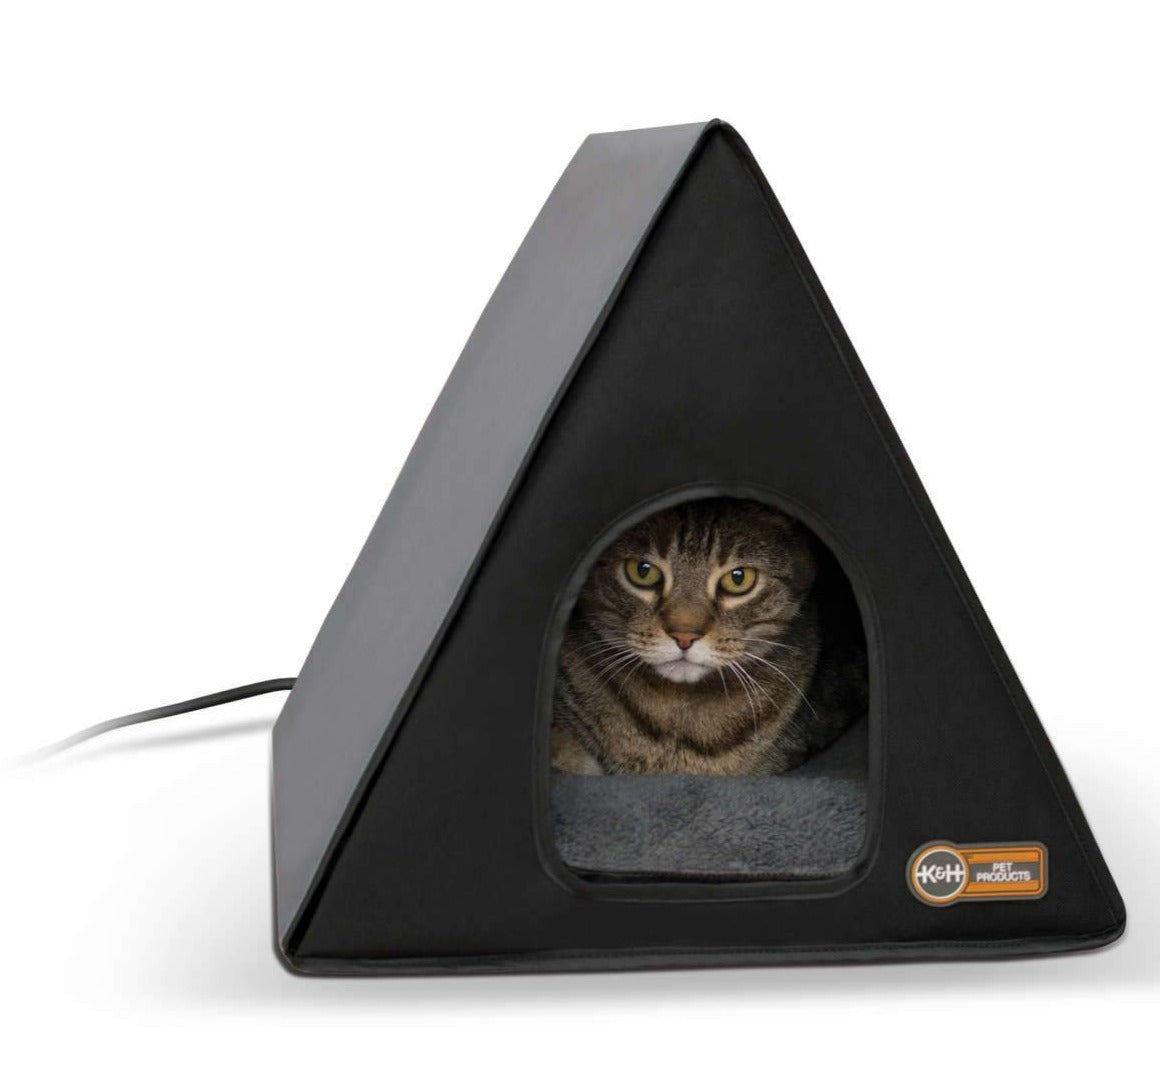 K&H Pet Products Heated A-Frame Cat House Gray / Black 18″ x 14″ x 14″ – KH3880